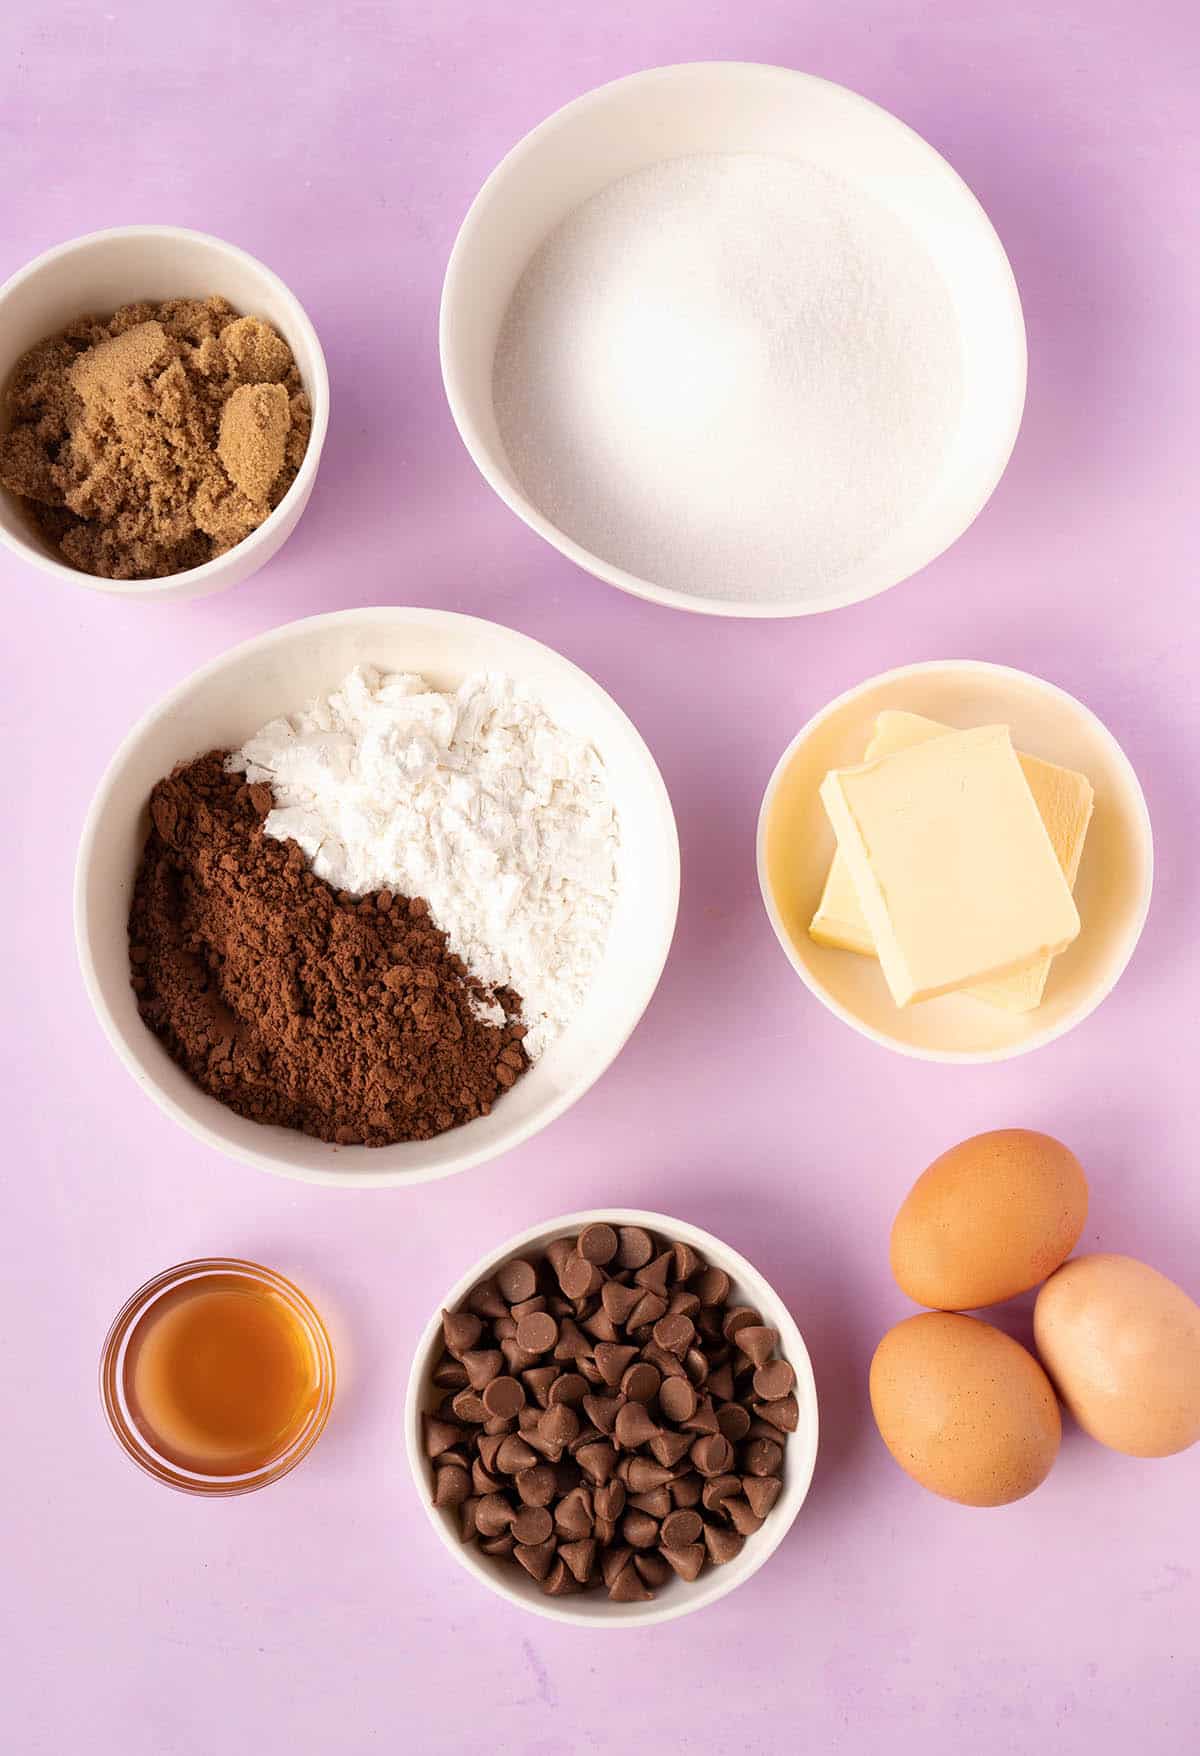 All the ingredients needed to make gluten free brownies from scratch on a purple background.